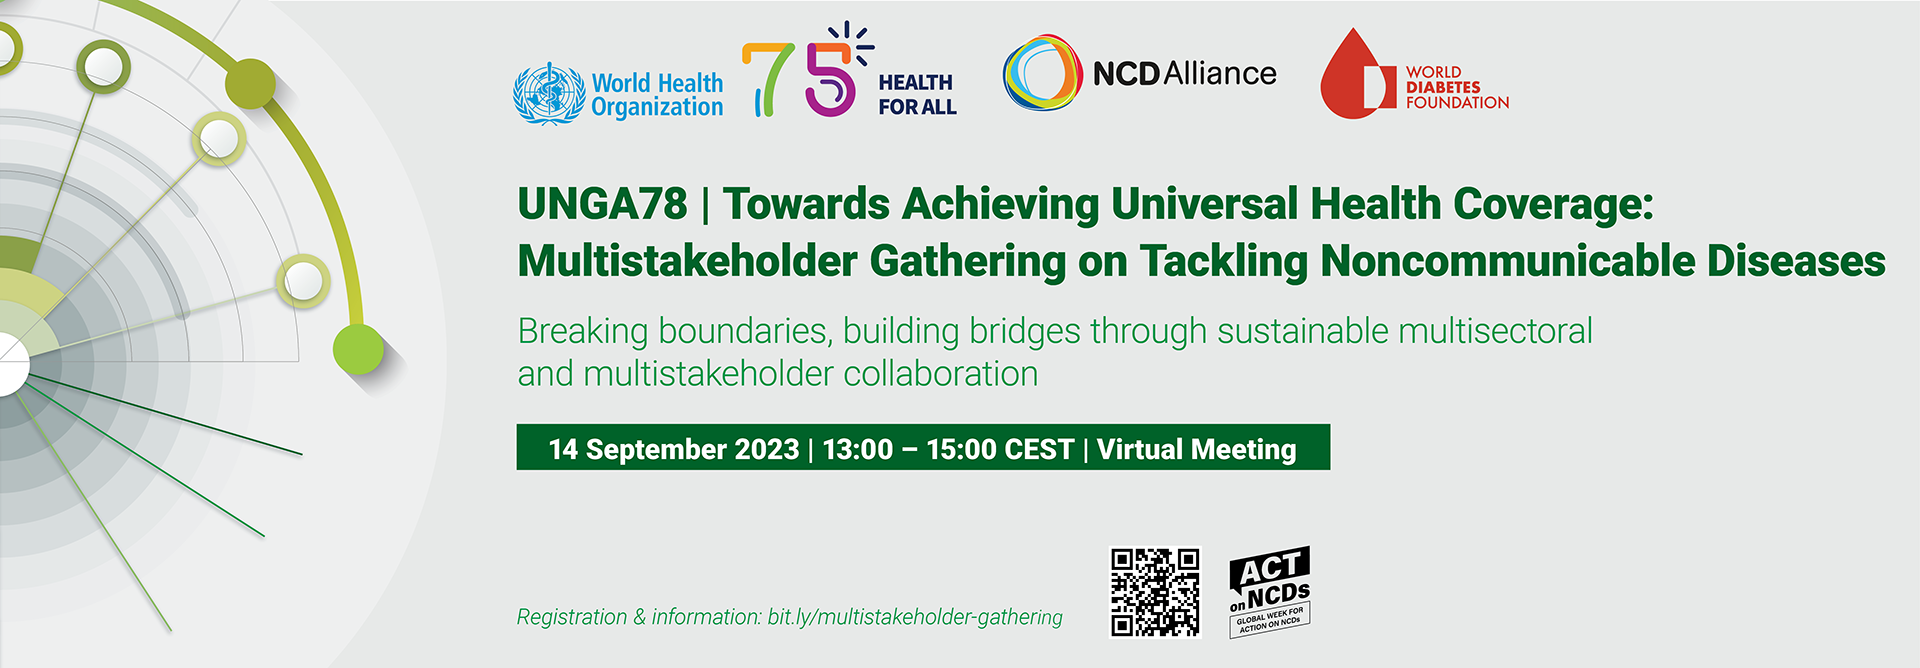 UNGA78 | Towards Achieving Universal Health Coverage: Multistakeholder Gathering on Tackling Noncommunicable Diseases